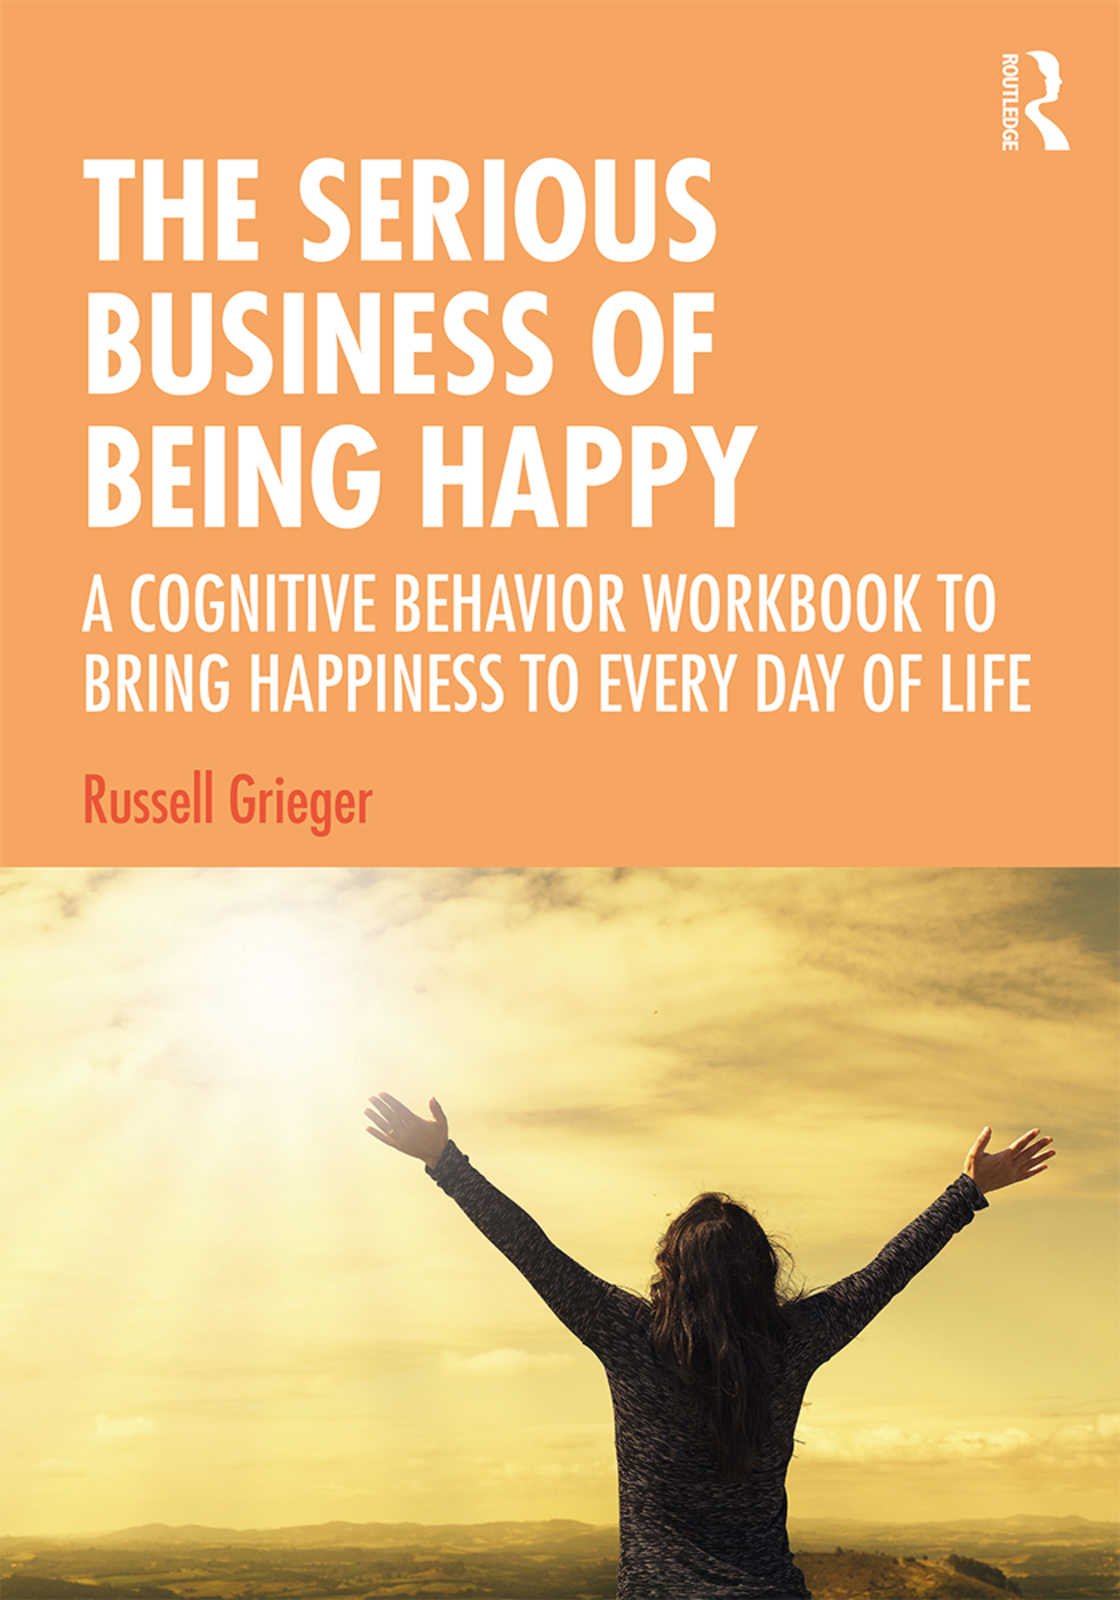 The Serious Business of Being Happy